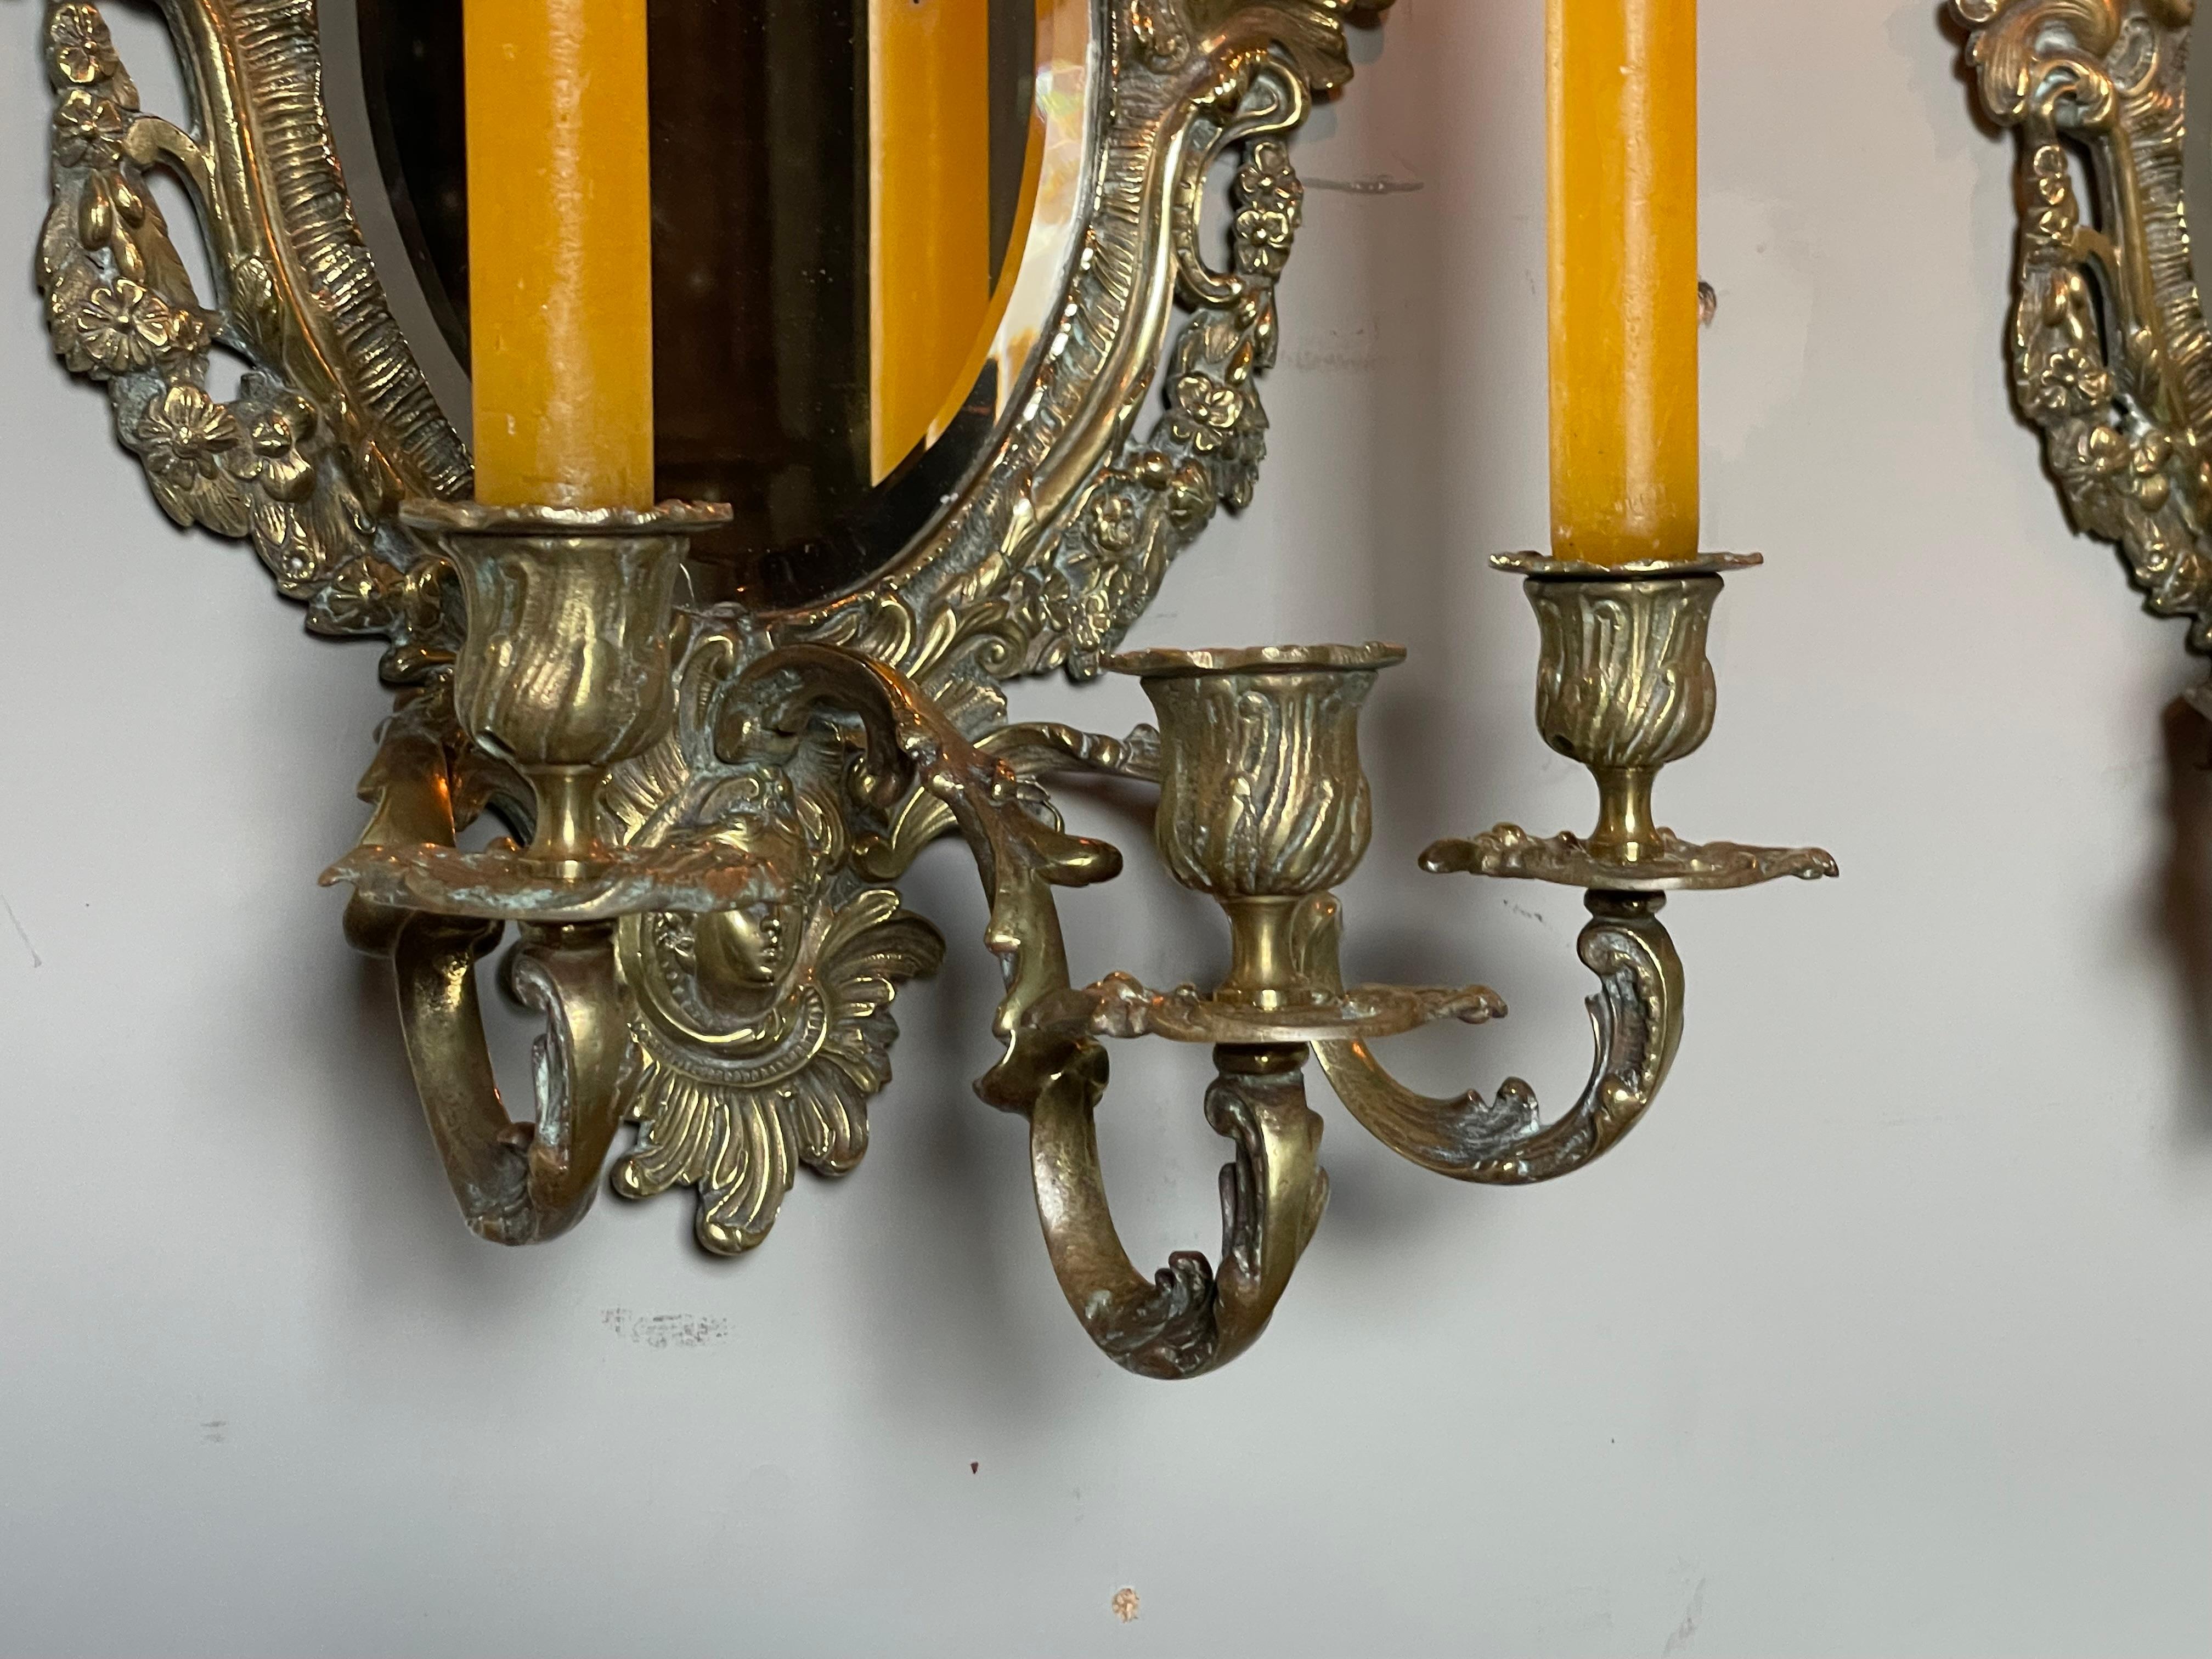 Antique Pair of Bronze Wall Sconce Candelabras w. Beveled Mirrors & Goddess Mask For Sale 8